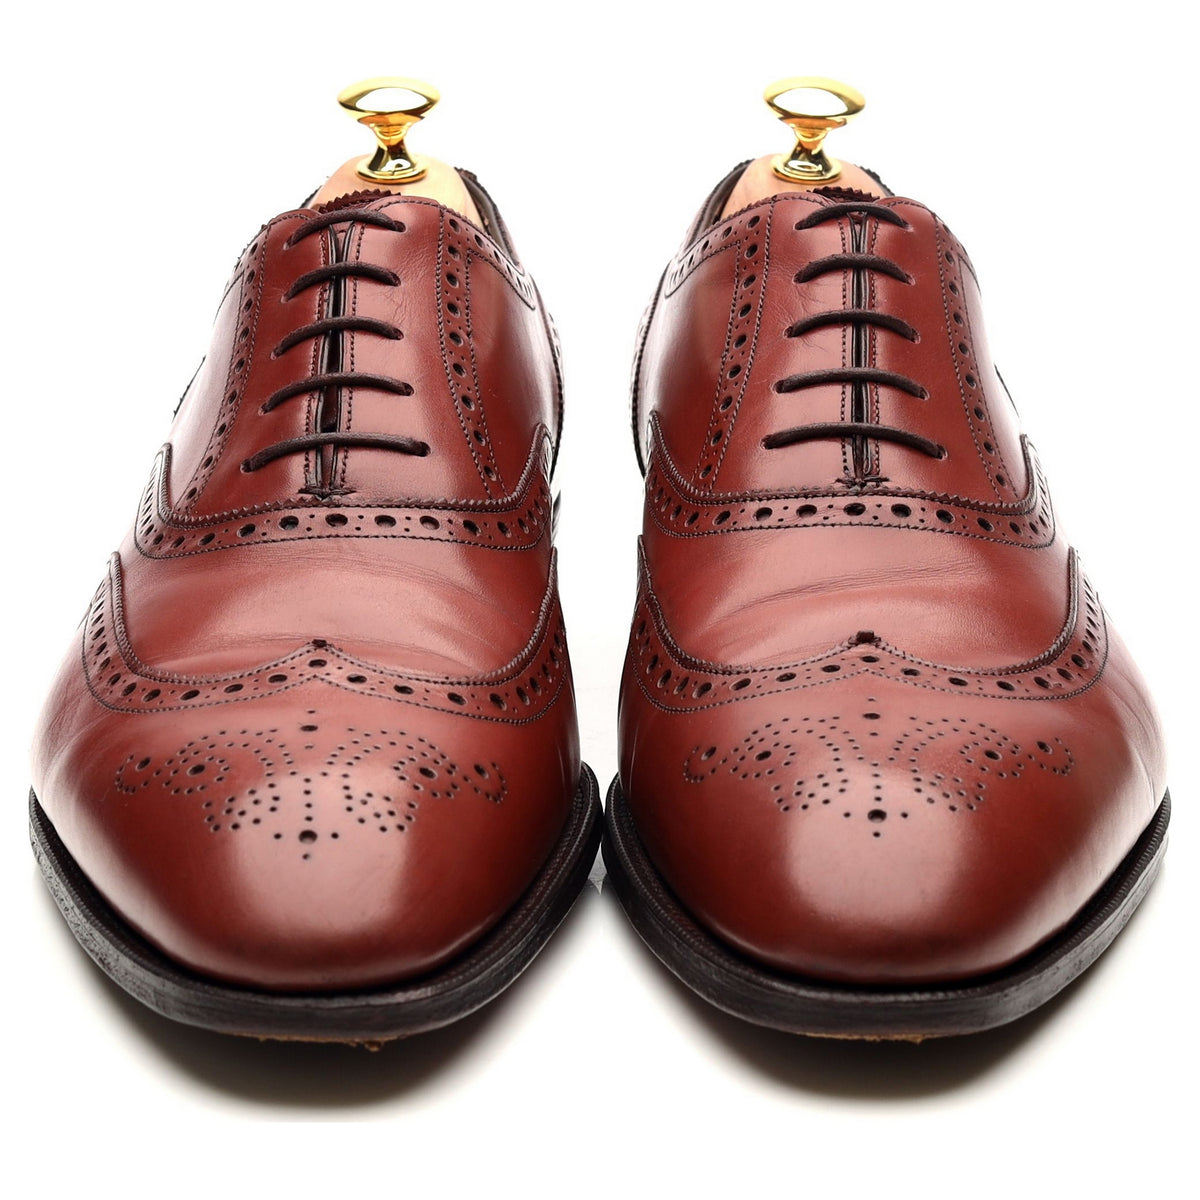 &#39;Rothschild&#39; Rosewood Brown Leather Oxford Brogues UK 11 F